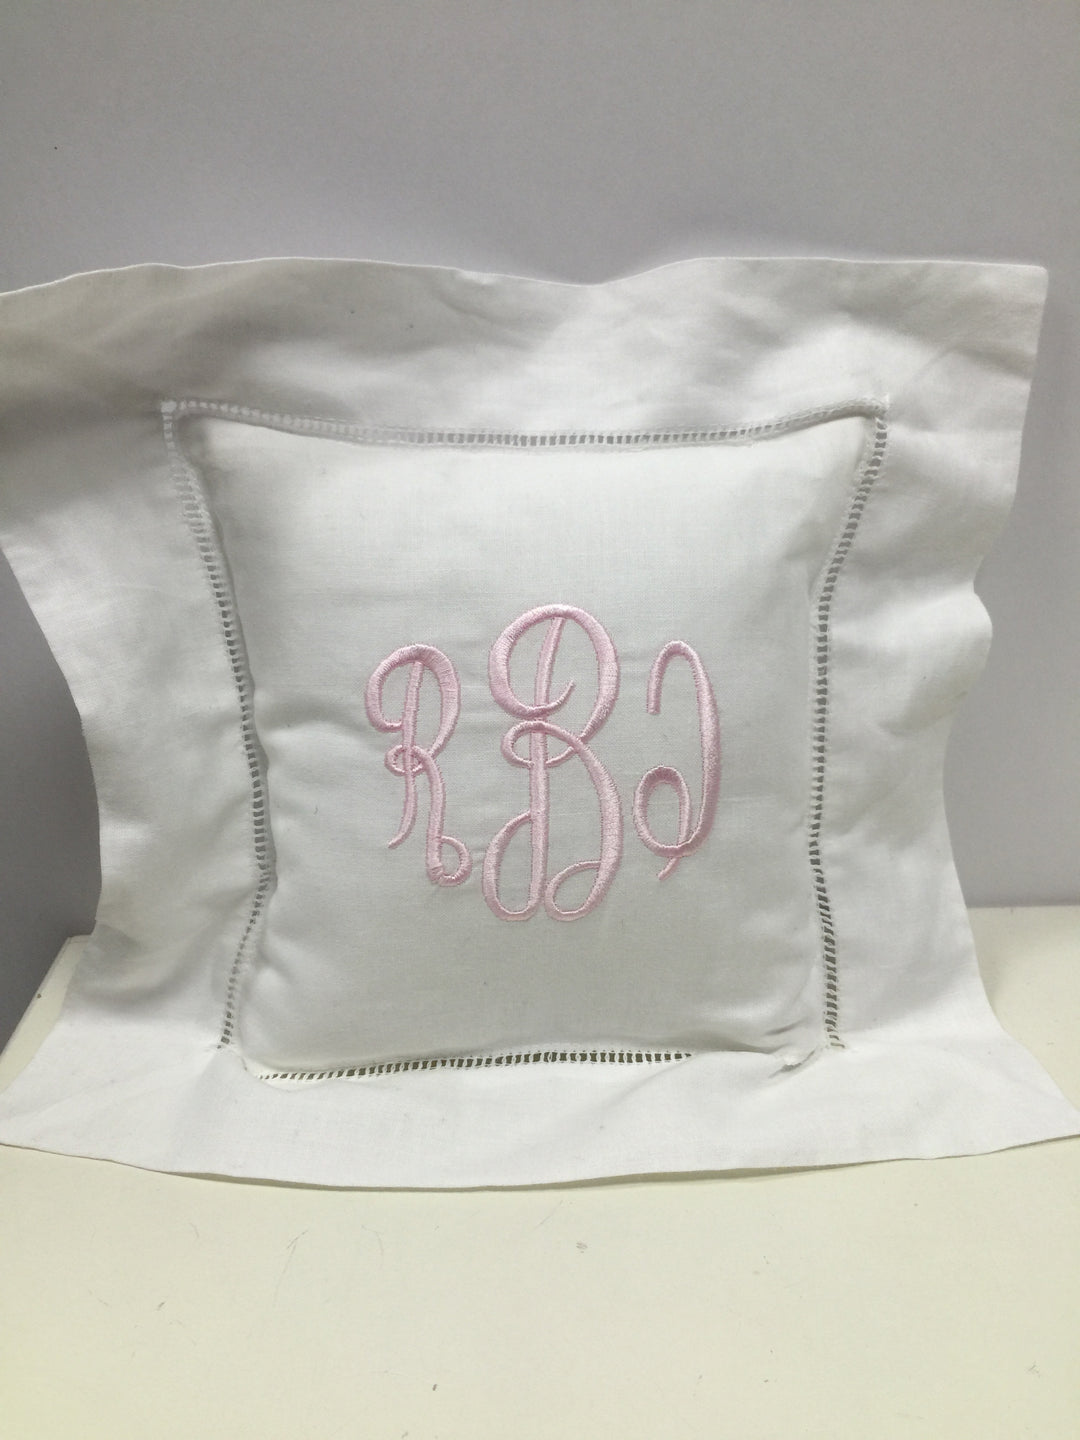 Monogramming Available
Small and sweet
Perfect gift